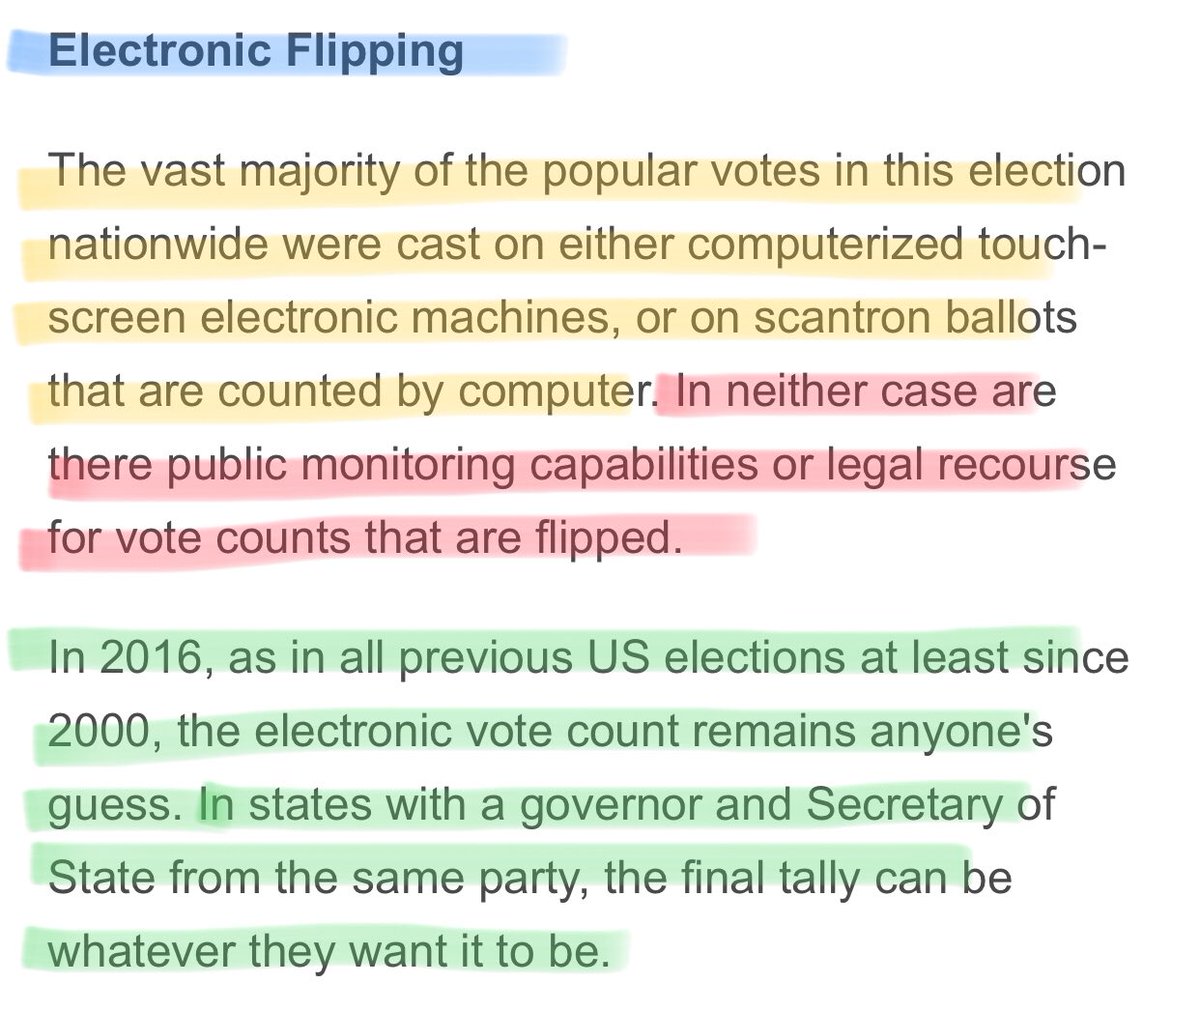 The truth is, our election machines are vulnerable and need an overhaul.  @comey said that they had NOT seen evidence that votes were changed. In other words a vote for Clinton stayed as a vote for Clinton. But that doesn’t mean the tallying was honest...